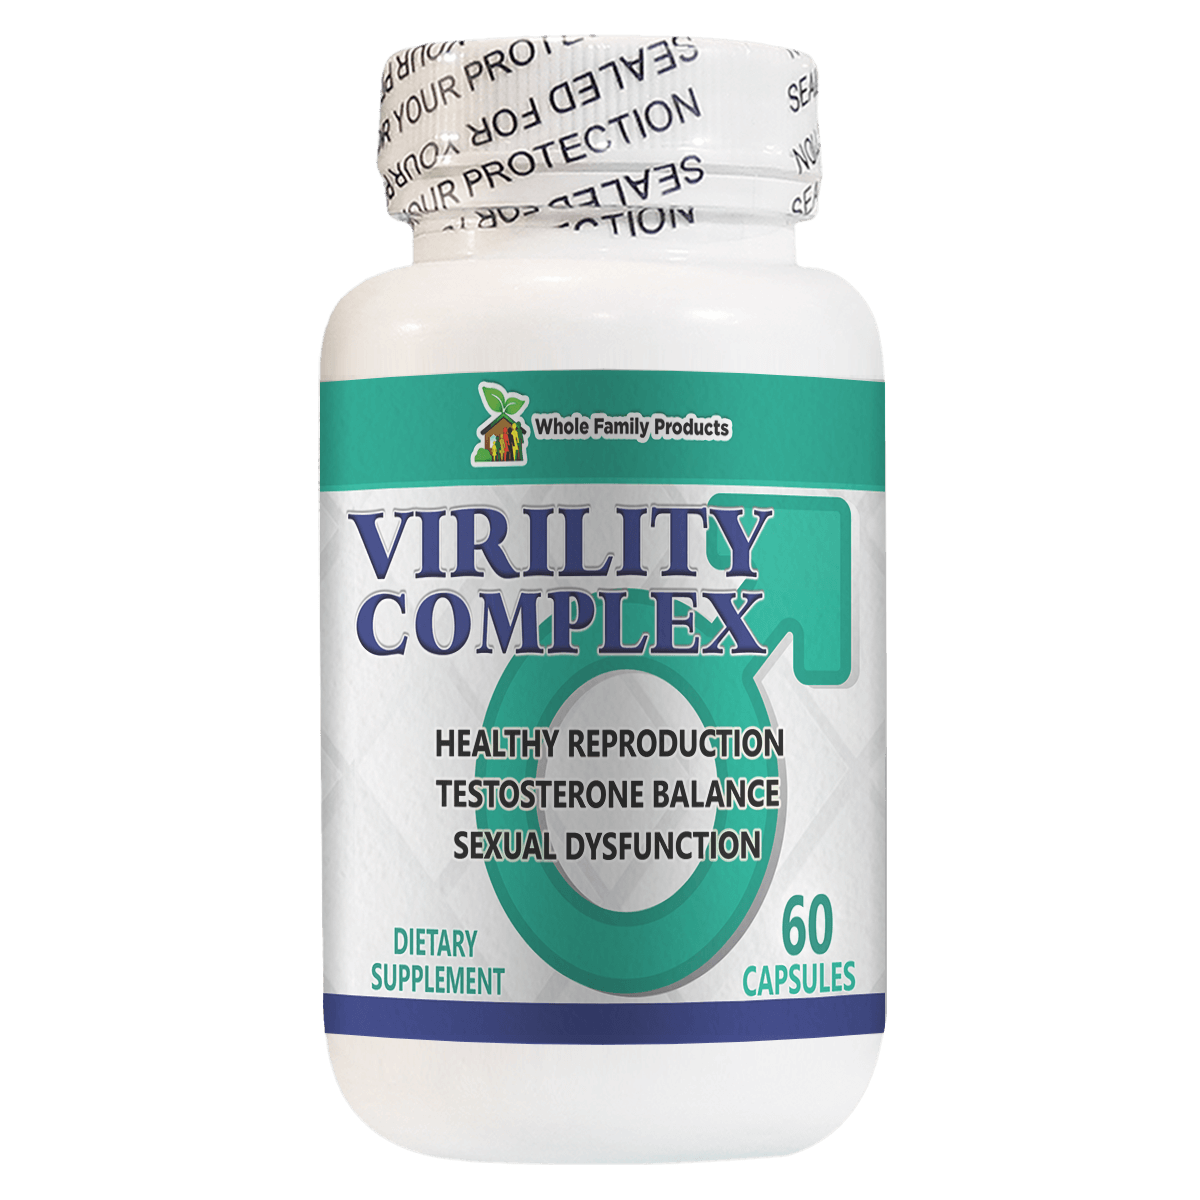 Virility Complex Natural Help for Sexual Dysfunction